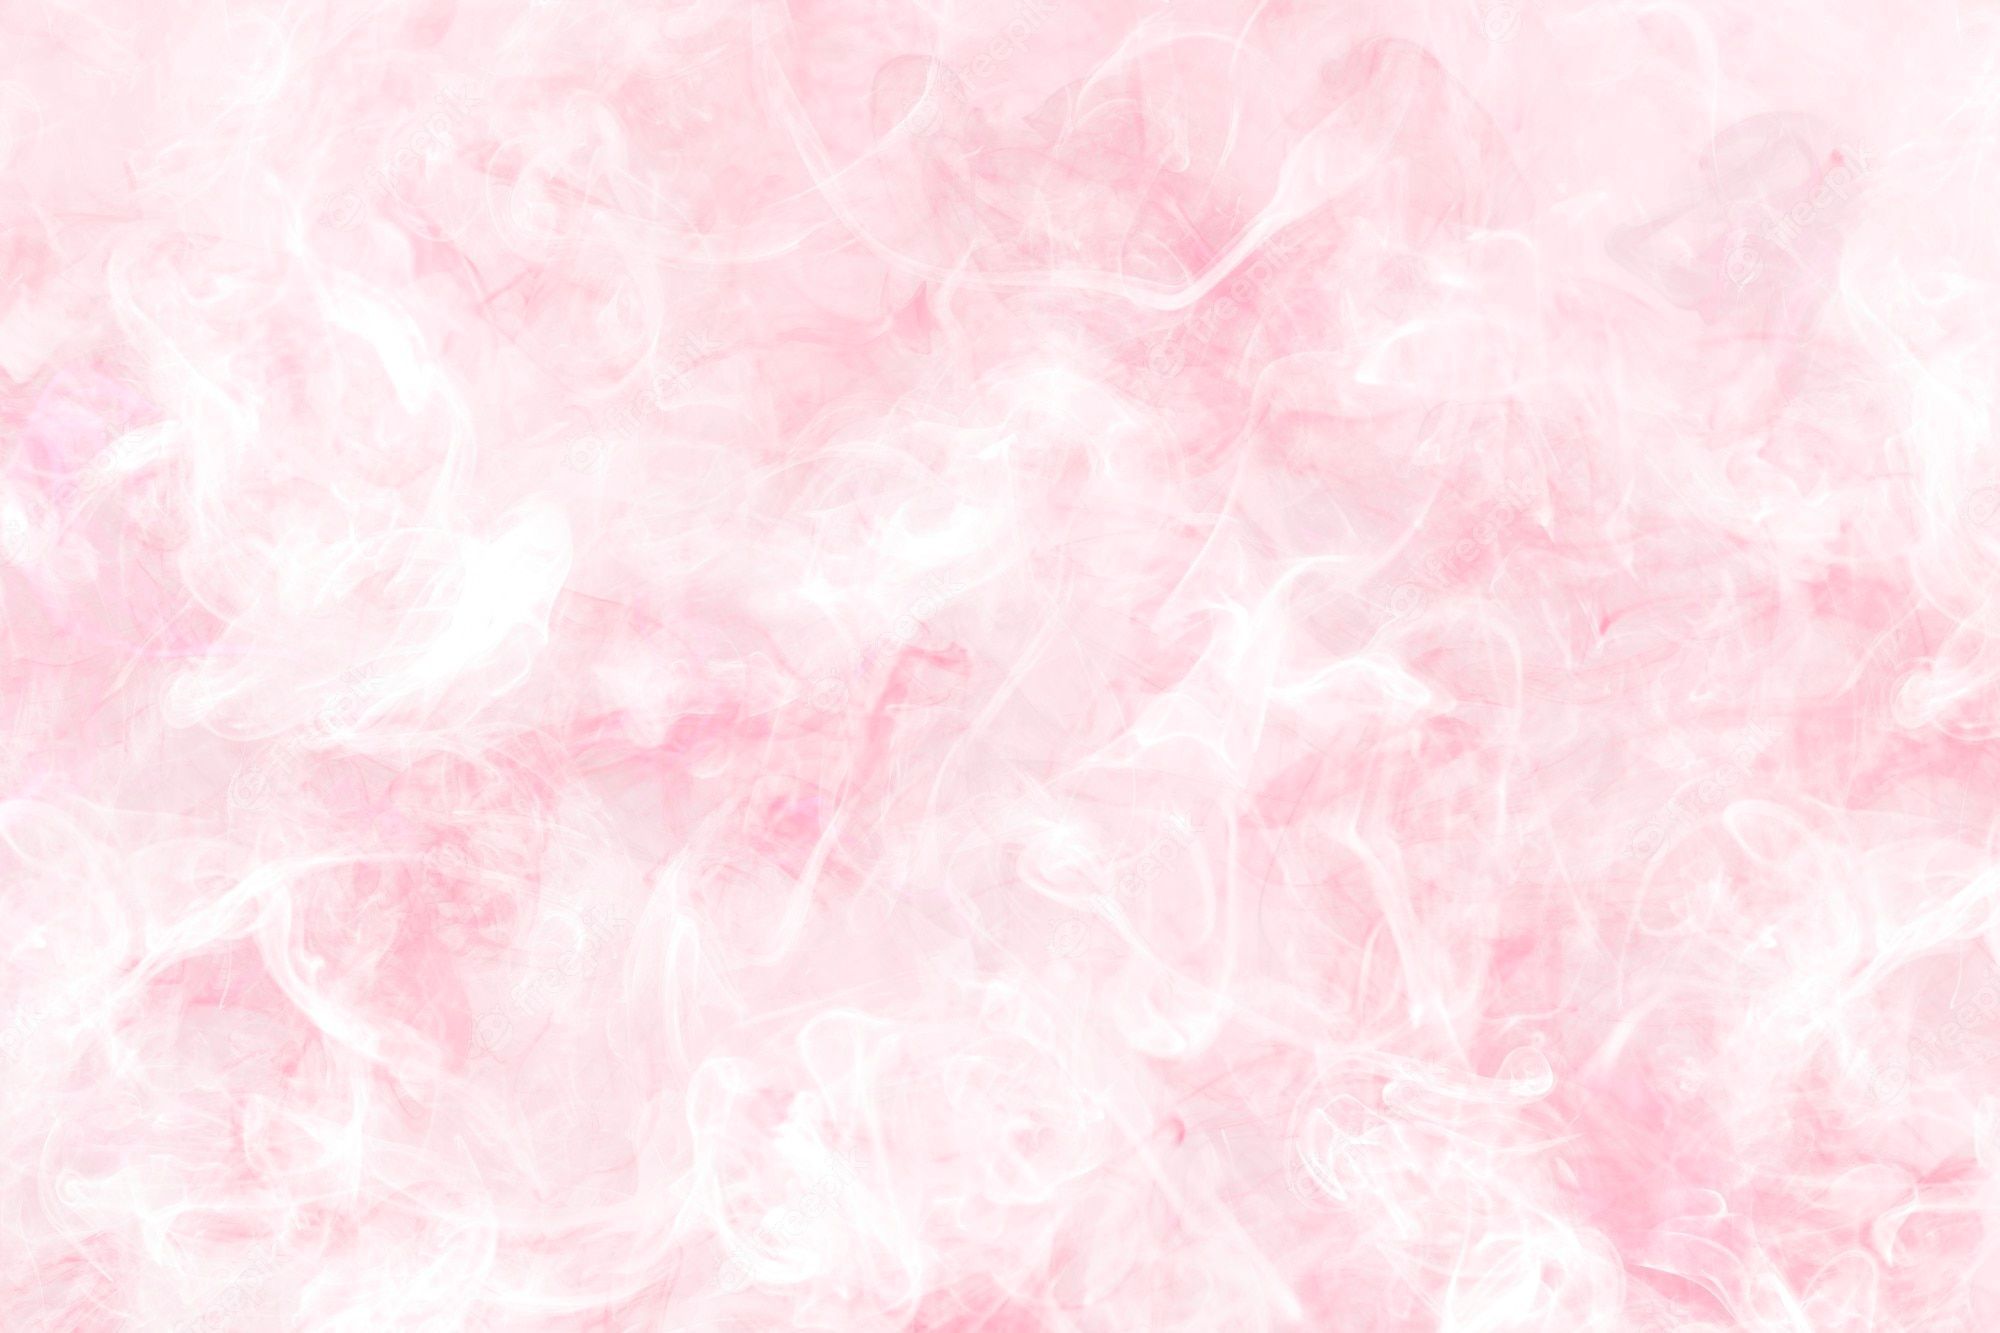 Pink Aesthetic Image